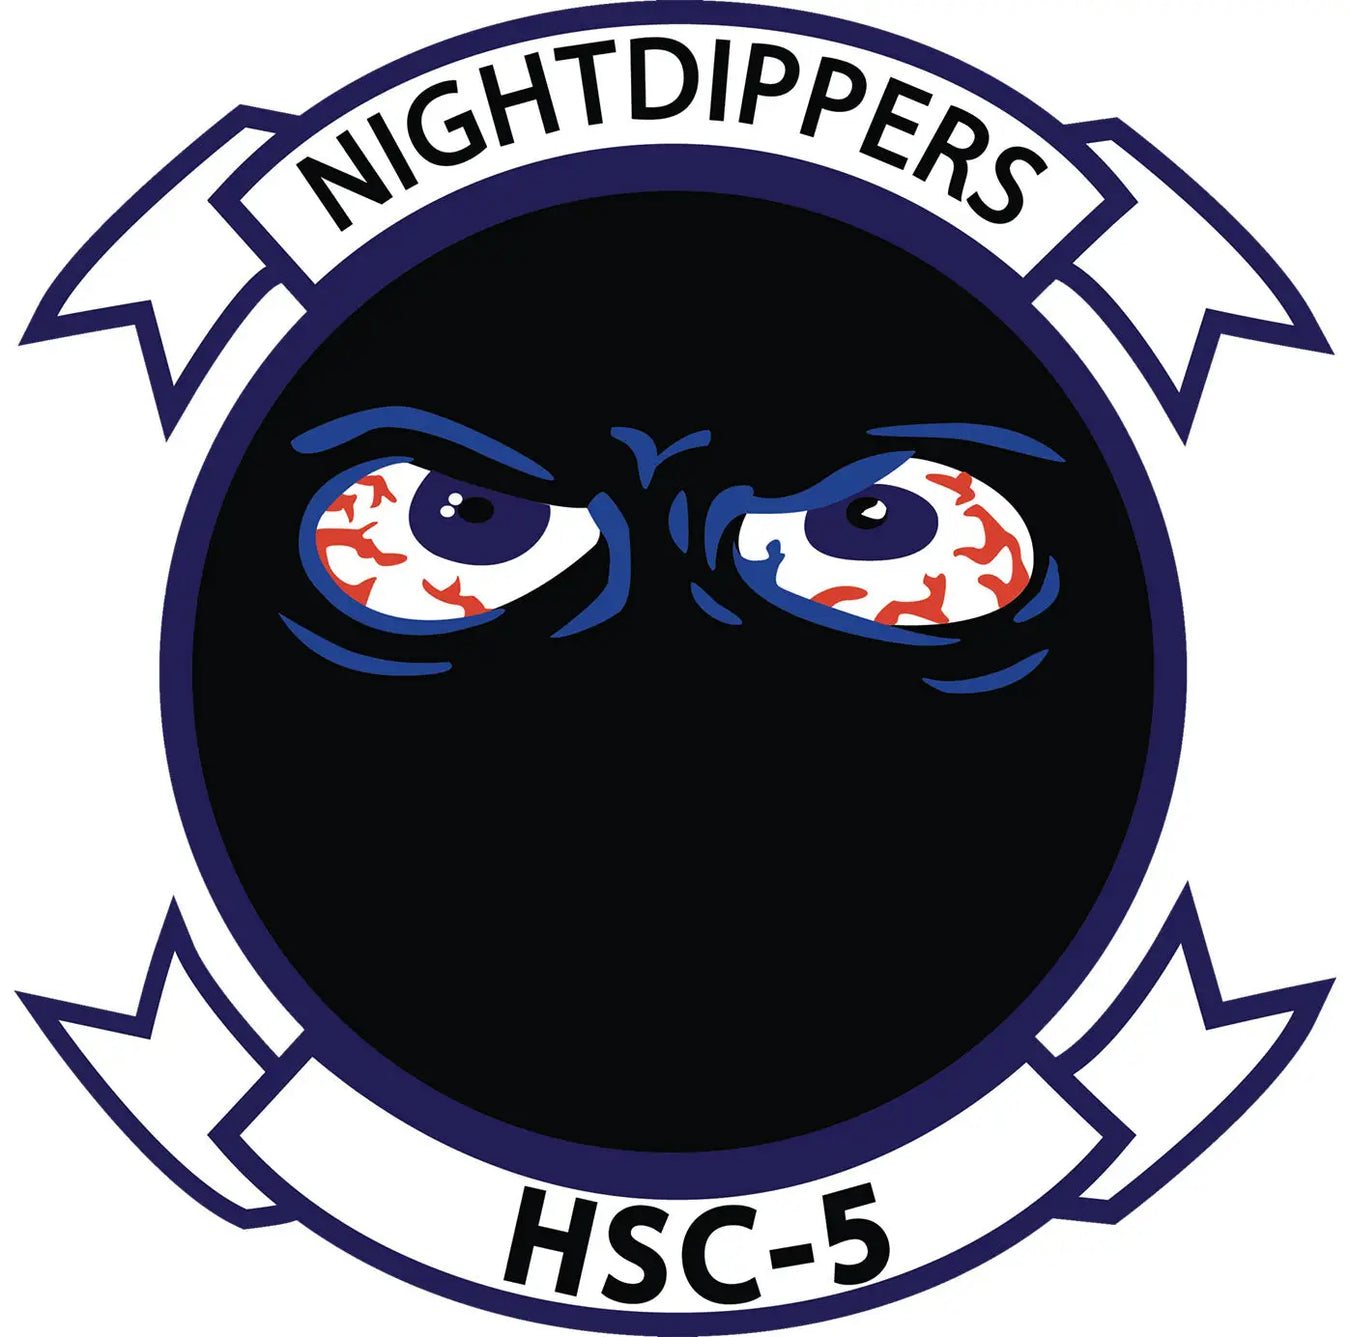 Helicopter Sea Combat Squadron 5 (HSC-5) Nightdippers